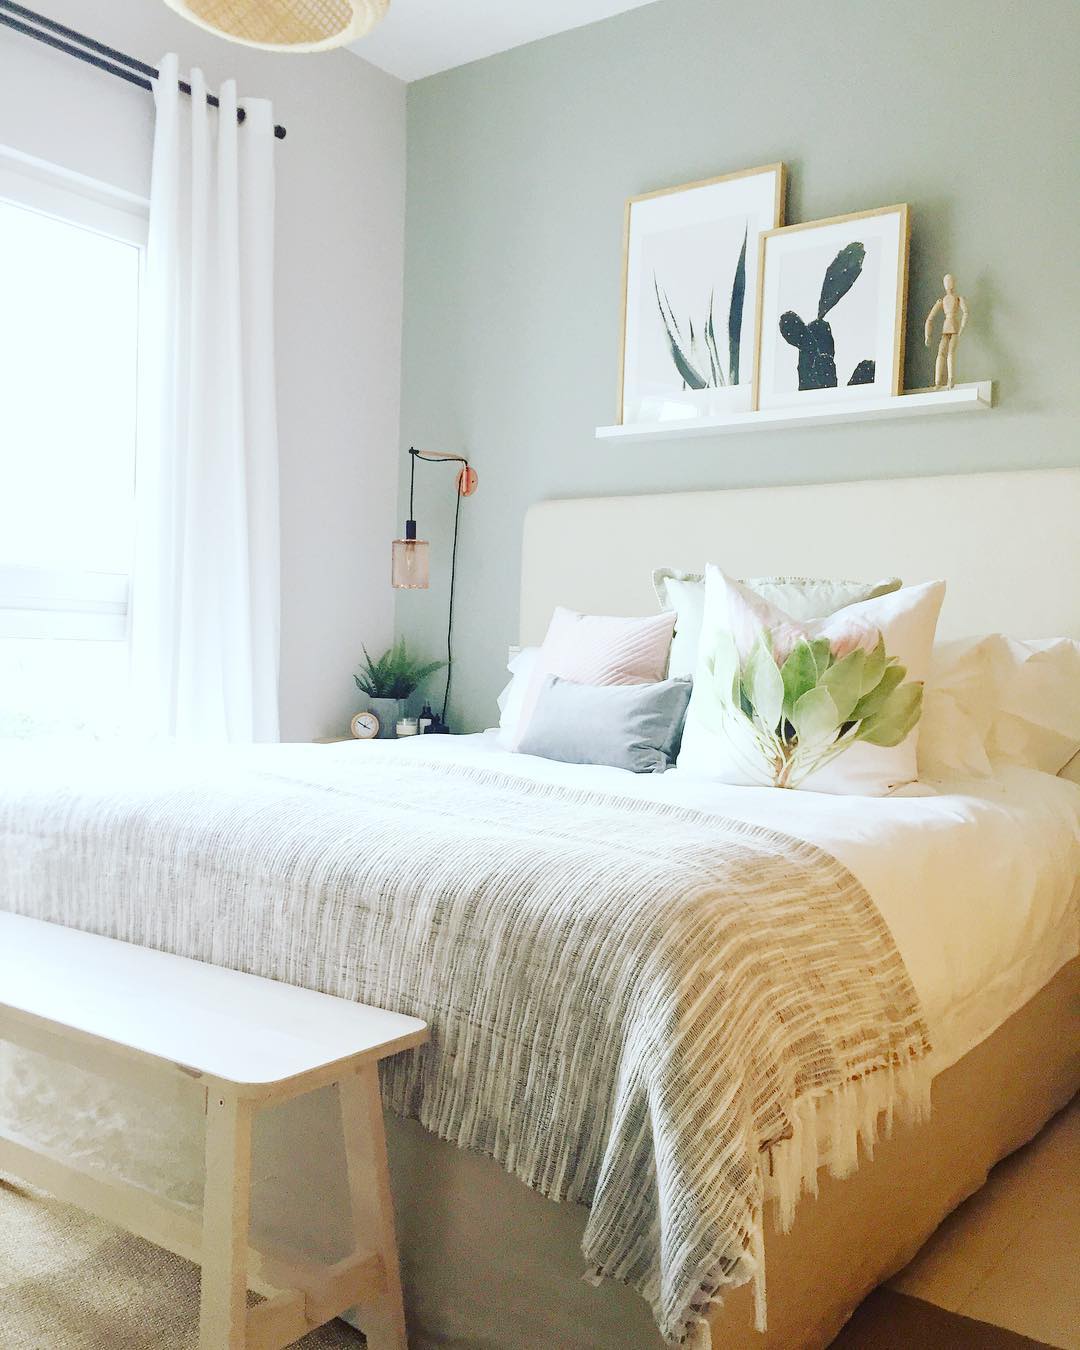 Blush and Green Dream! Pic by escape_home